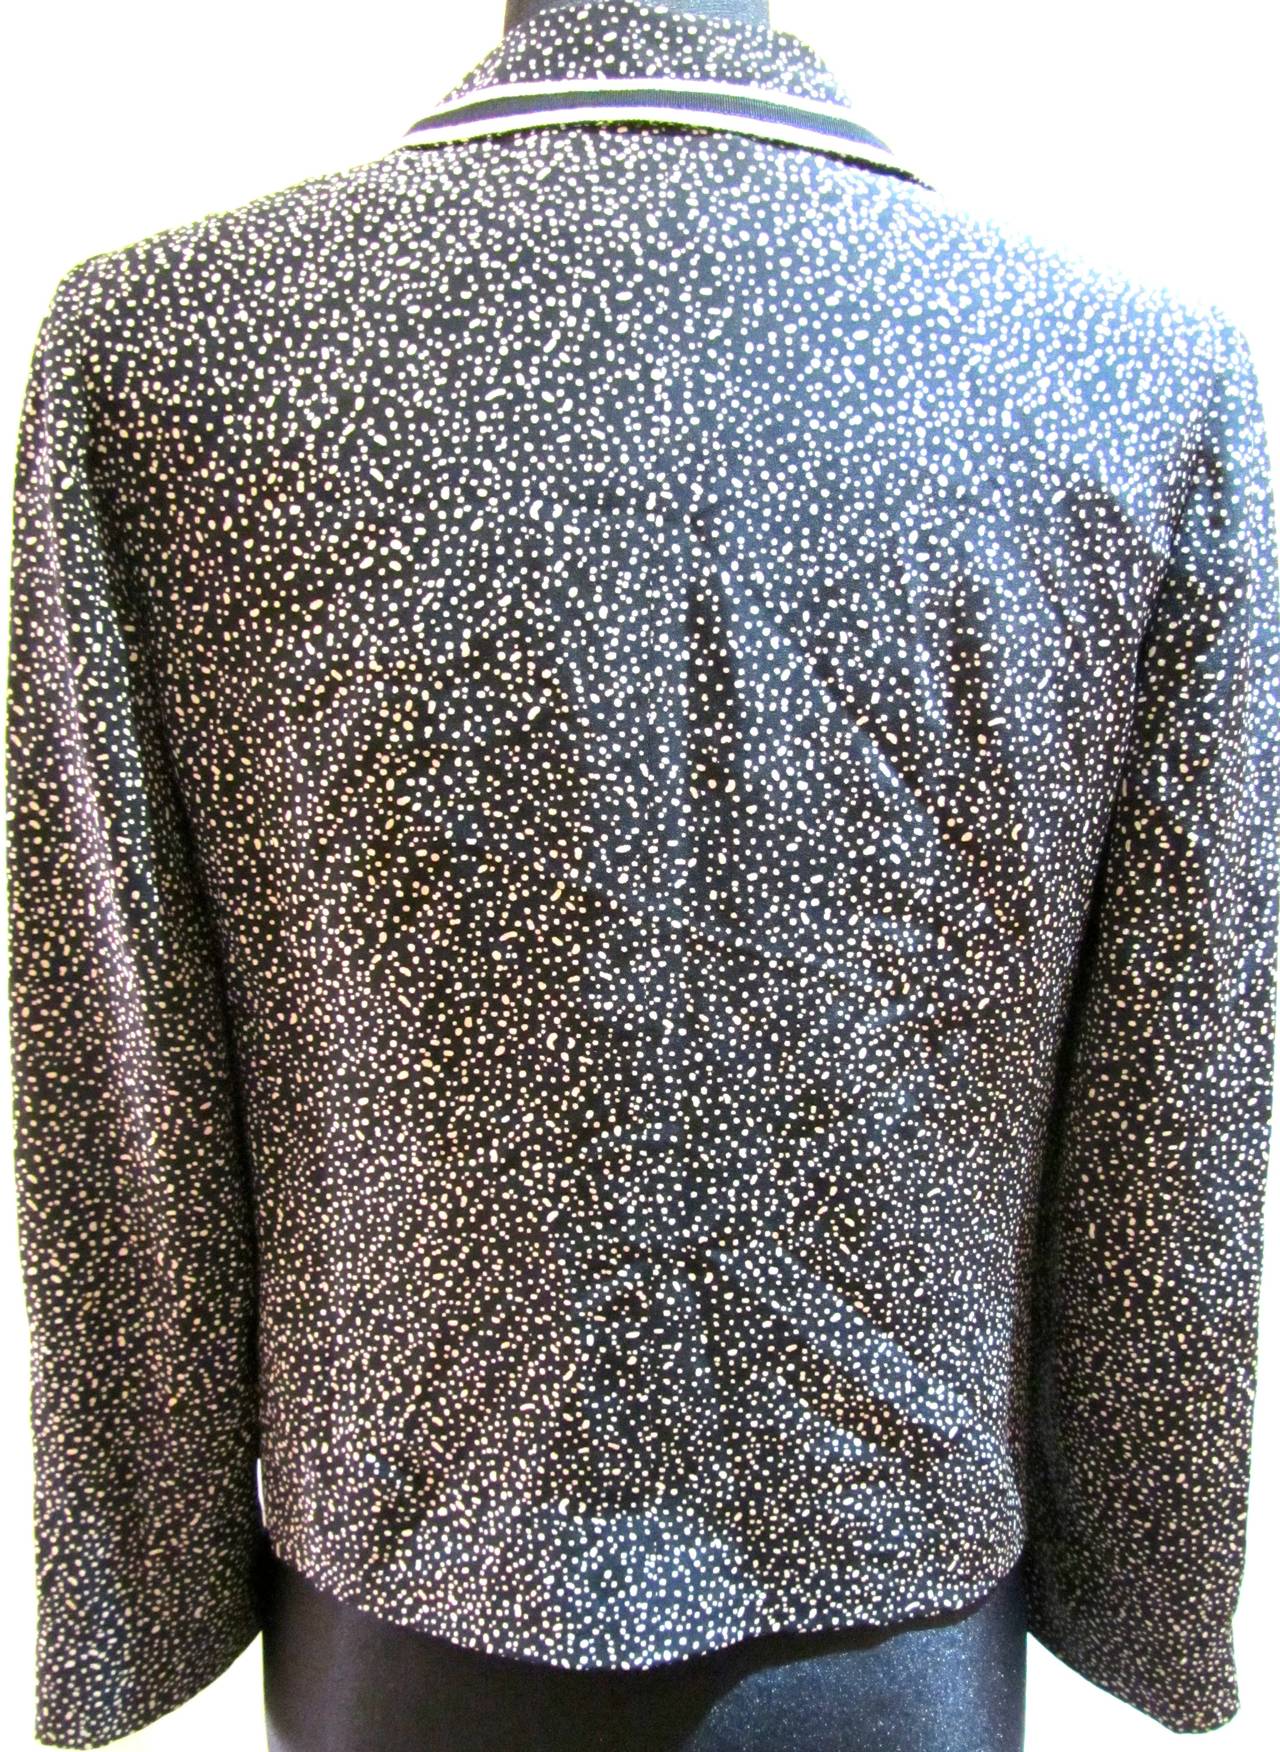 Women's Chanel Silk Suit - Black and Cream Fabric with Iconic Lion Buttons - 1970's For Sale